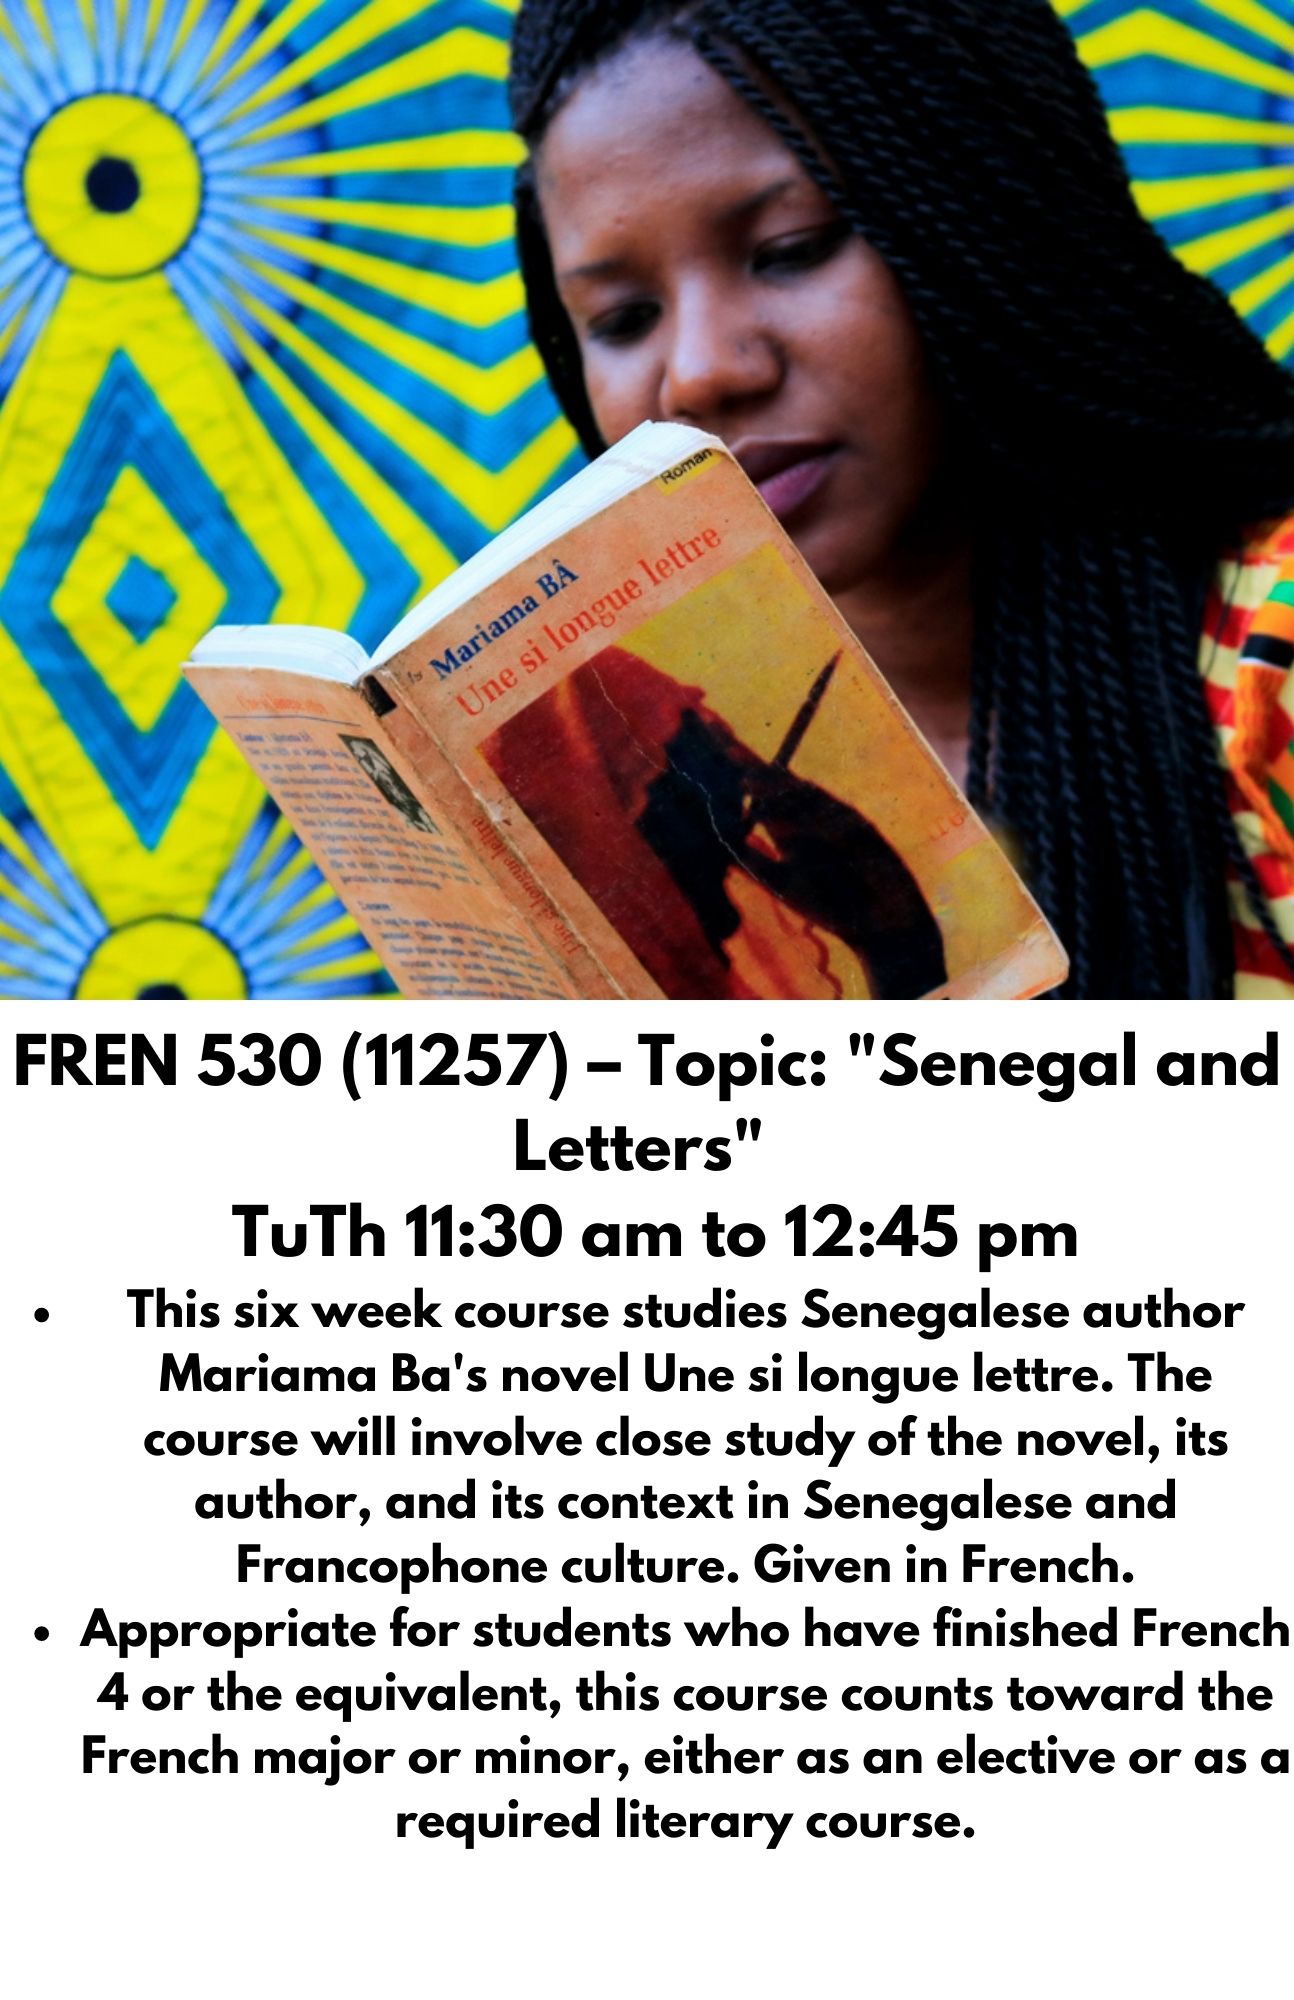 FREN 530 (11257) – Topic: "Senegal and Letters"   TuTh 11:30 am to 12:45 pm This six week course studies Senegalese author Mariama Ba's novel Une si longue lettre. The course will involve close study of the novel, its author, and its context in Senegalese and Francophone culture. Given in French. Appropriate for students who have finished French 4 or the equivalent, this course counts toward the French major or minor, either as an elective or as a required literary course.